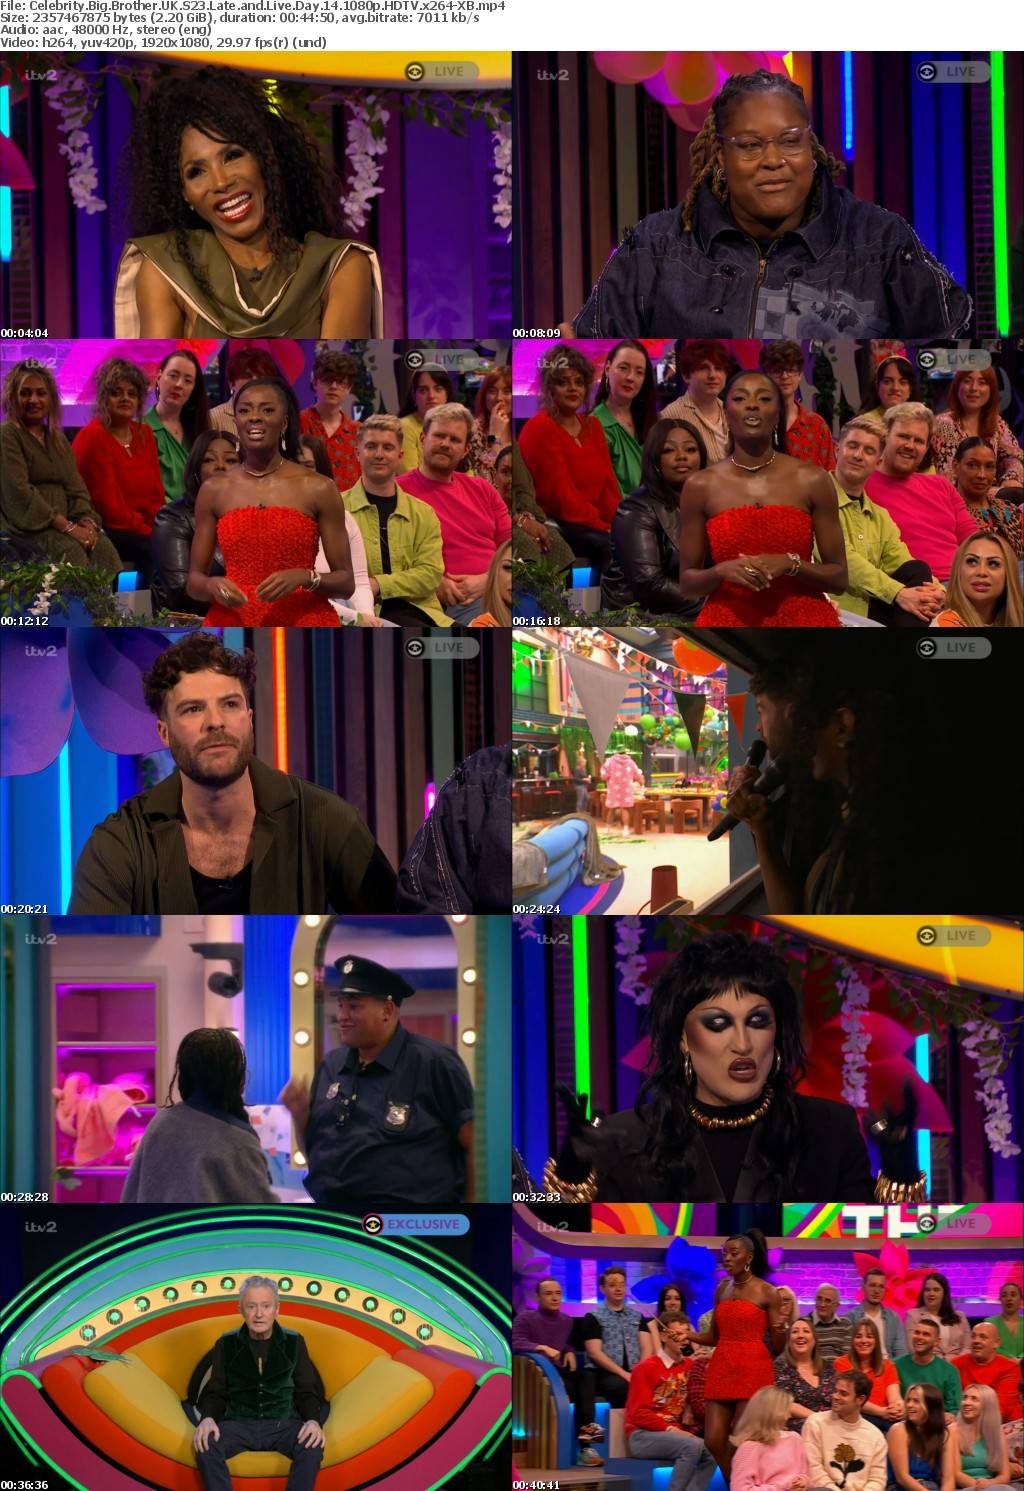 Celebrity Big Brother UK S23 Late and Live Day 14 1080p HDTV x264-XB